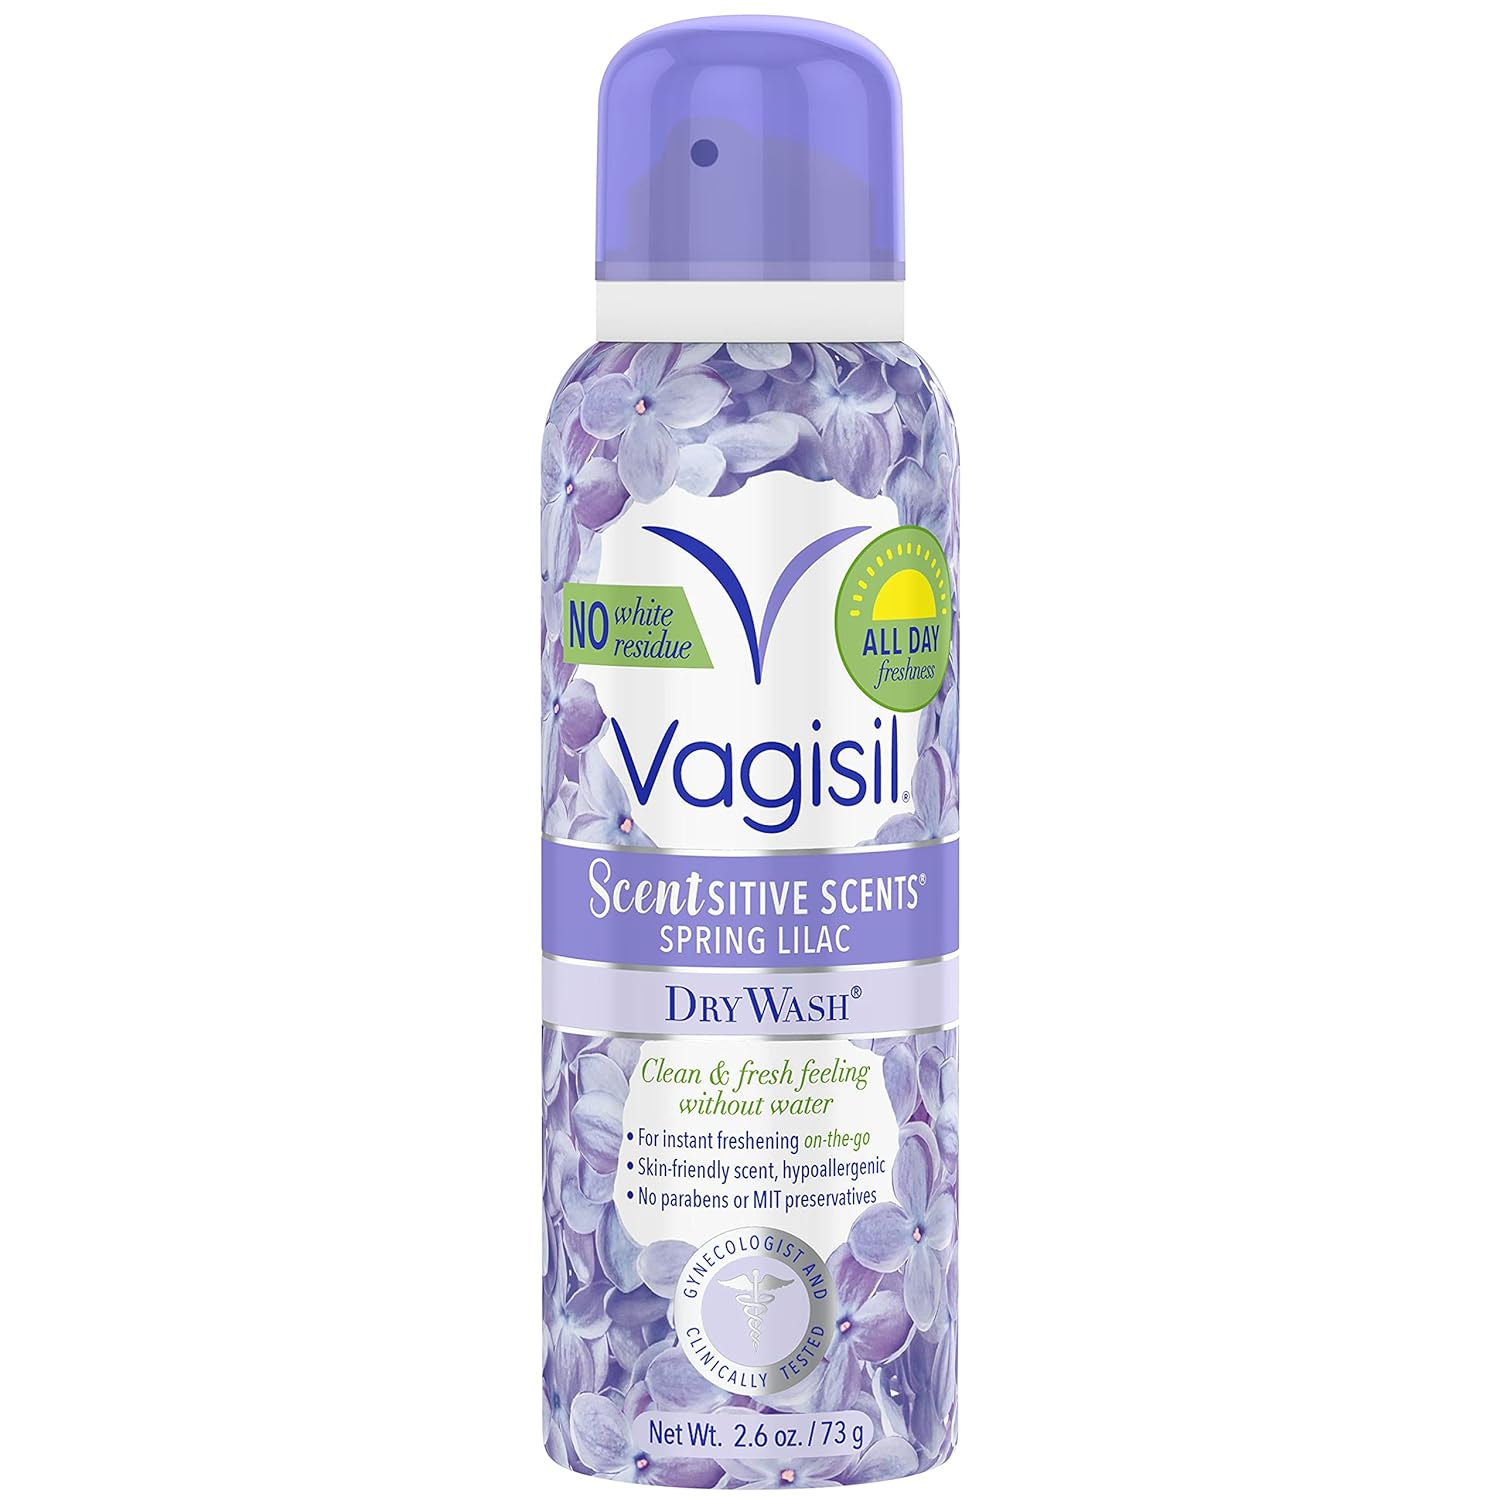 Vagisil Scentsitive Scents Feminine Dry Wash Deodorant Spray for Women, Gynecologist Tested, Paraben Free, Spring Lilac, 2.6 Ounce (Pack of 1)